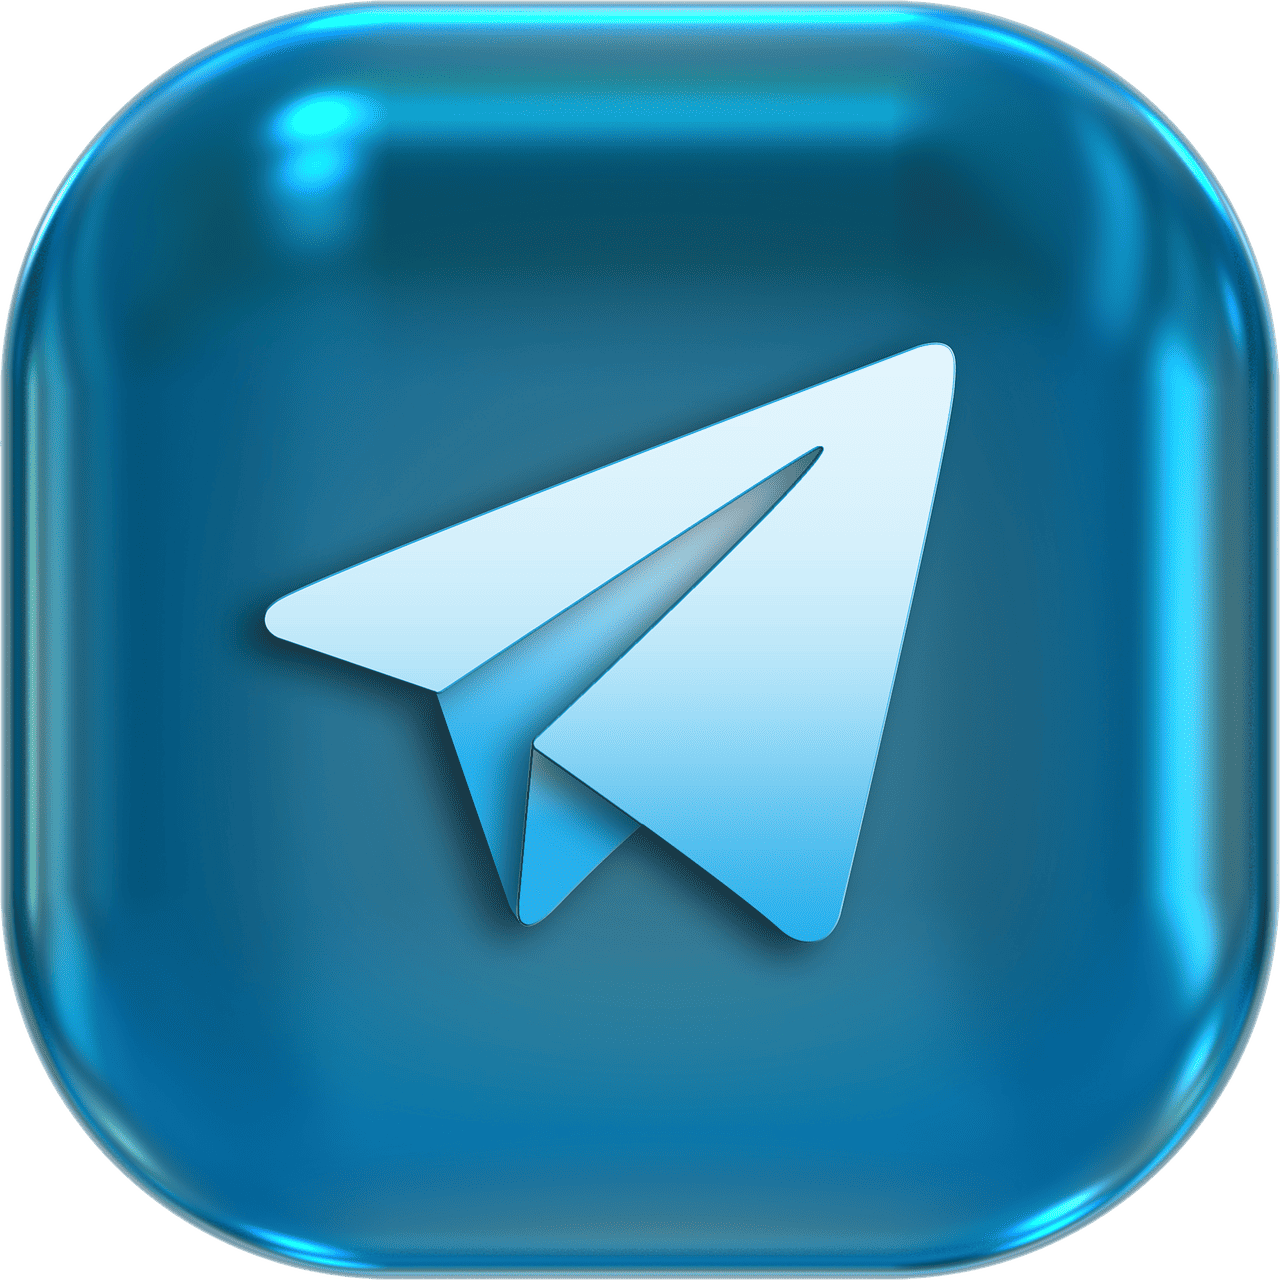 ALERT: Extremely Illiterate Scammer and Trademark Infringer Is Posing as Us on Telegram.org!!!